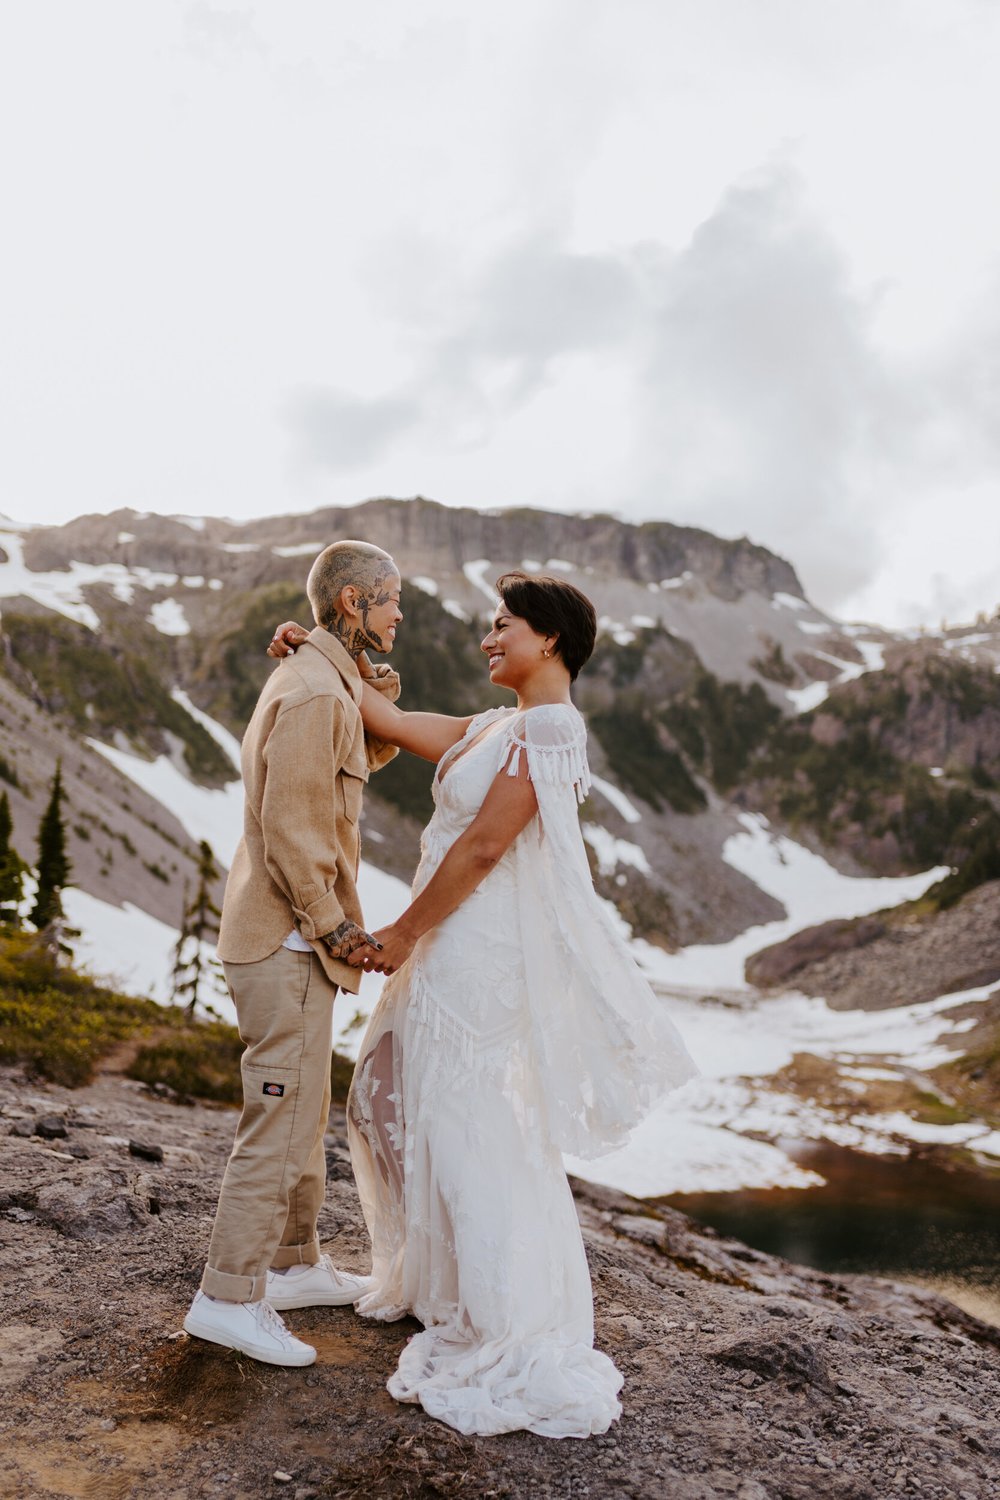 North Cascades National Park Elopement at Bagley Lakes, Mt.Baker Elopement, Artist Point Elopement, Pacific Northwest Elopement, Lesbian Couple, Photography by Tida Svy | www.tidasvy.com